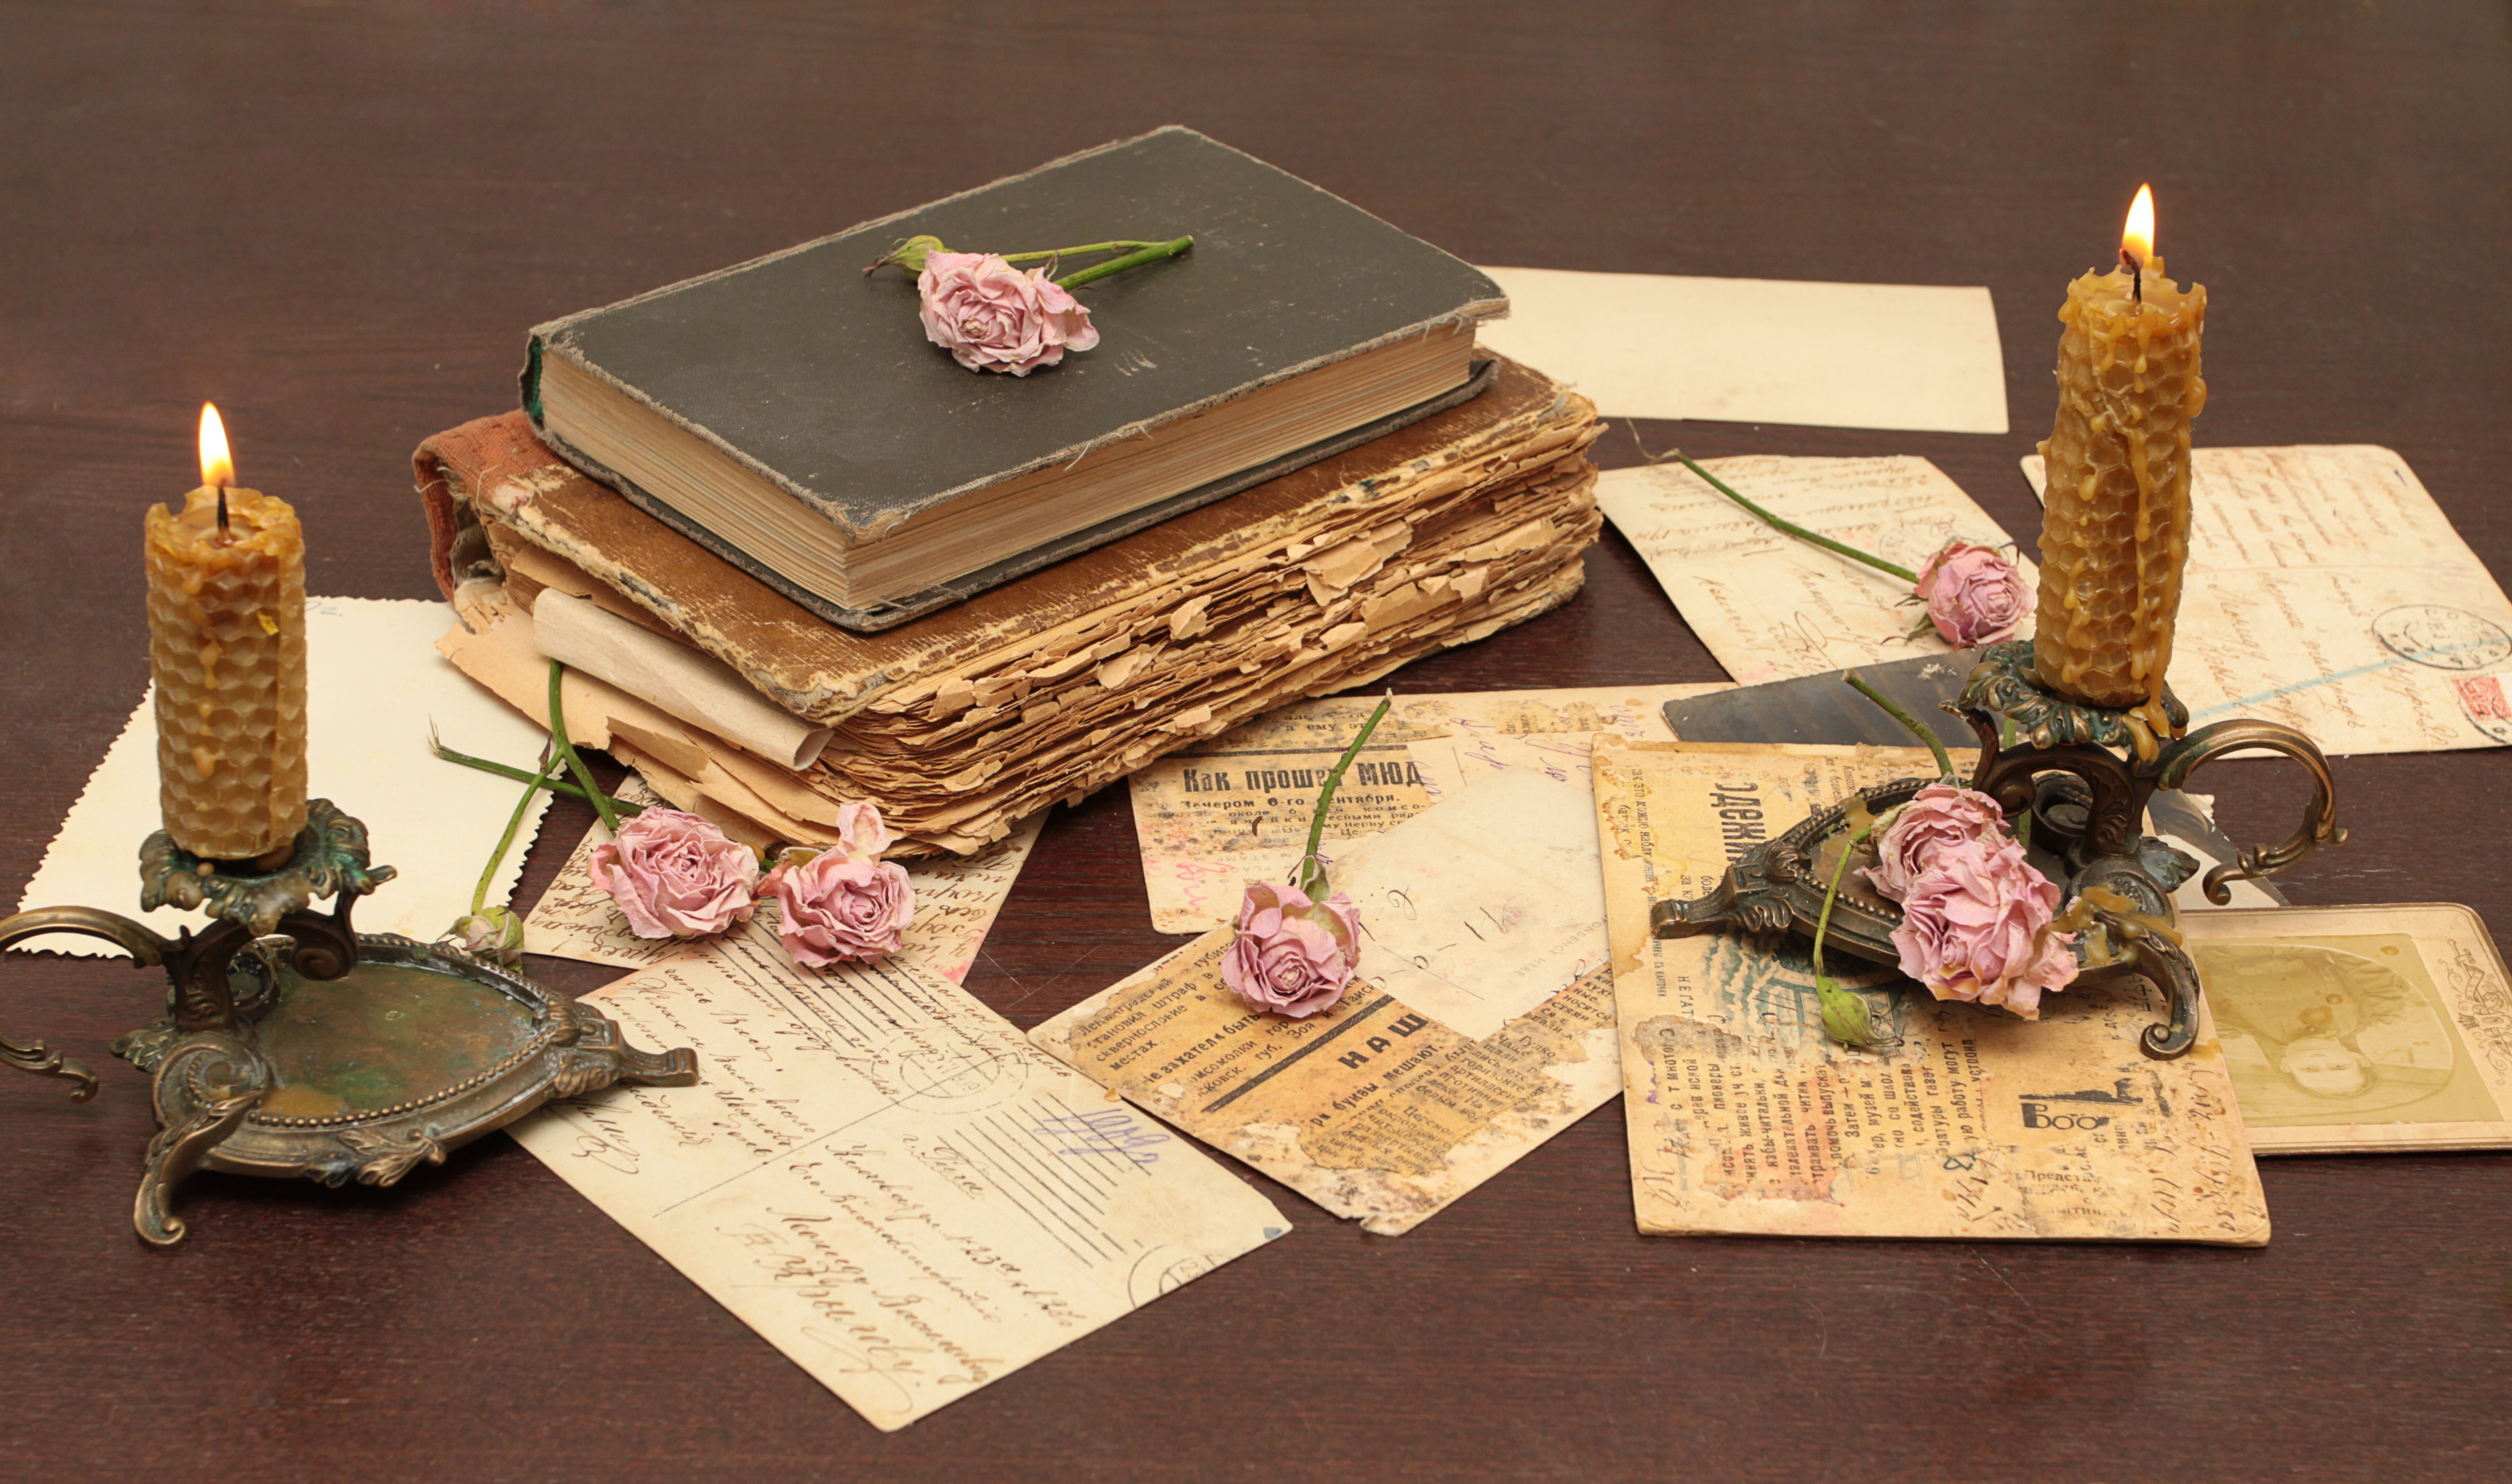 miscellaneous, old, vintage, miscellanea, books, flowers, roses, candles, postcards, table, paper, letters, candlesticks 1080p